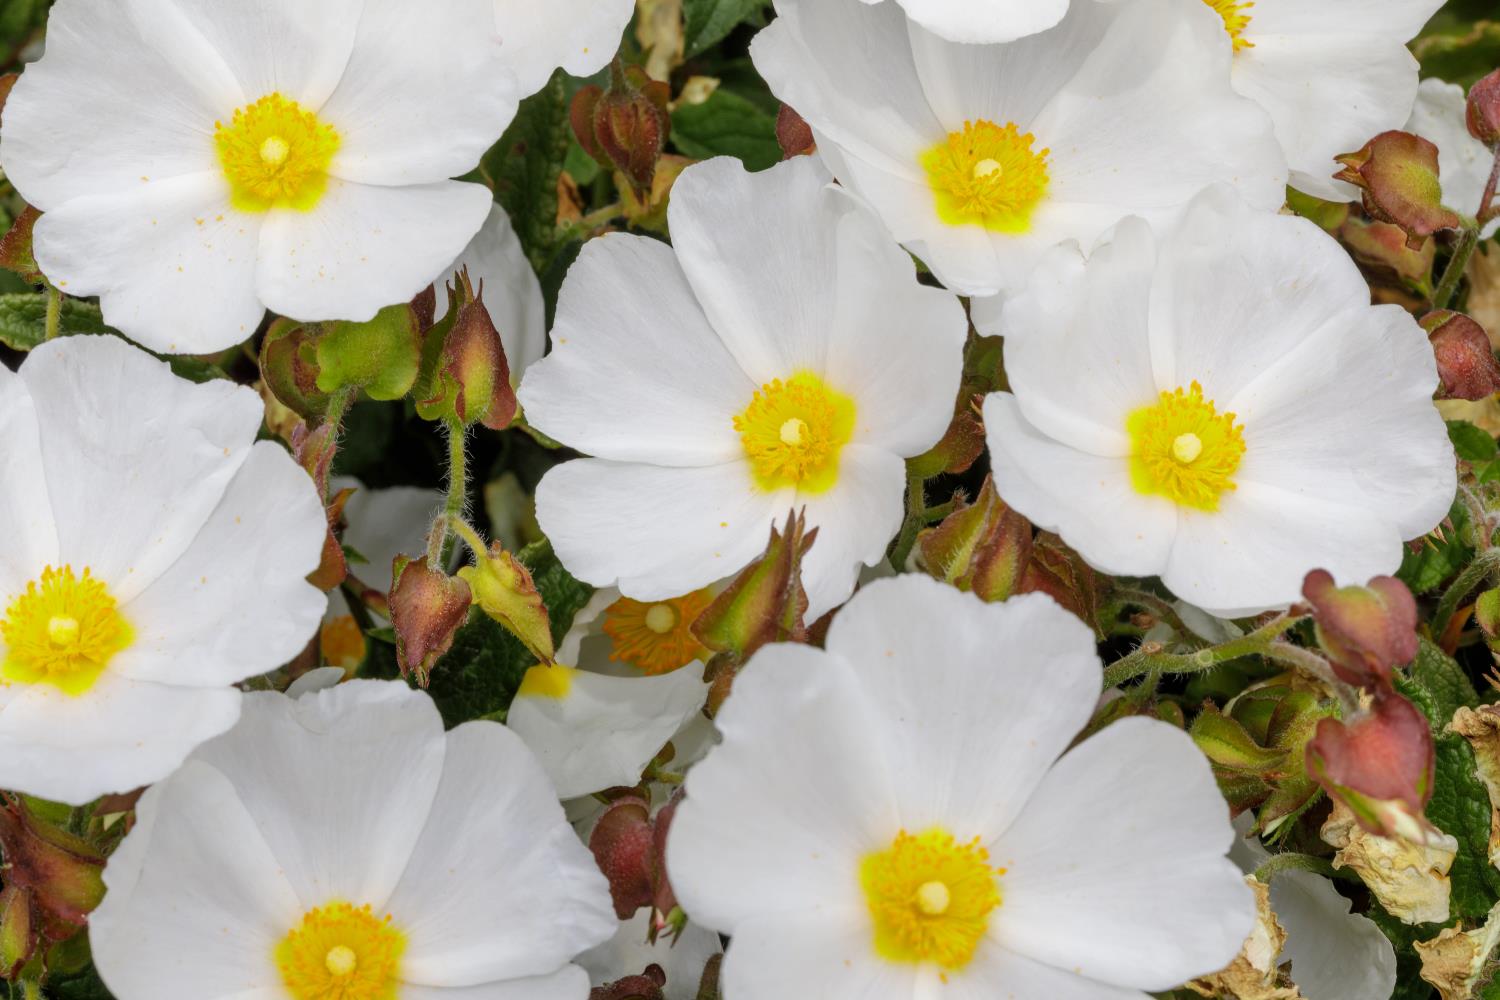 Close up view of a group of white petaled flowers with yellow centers